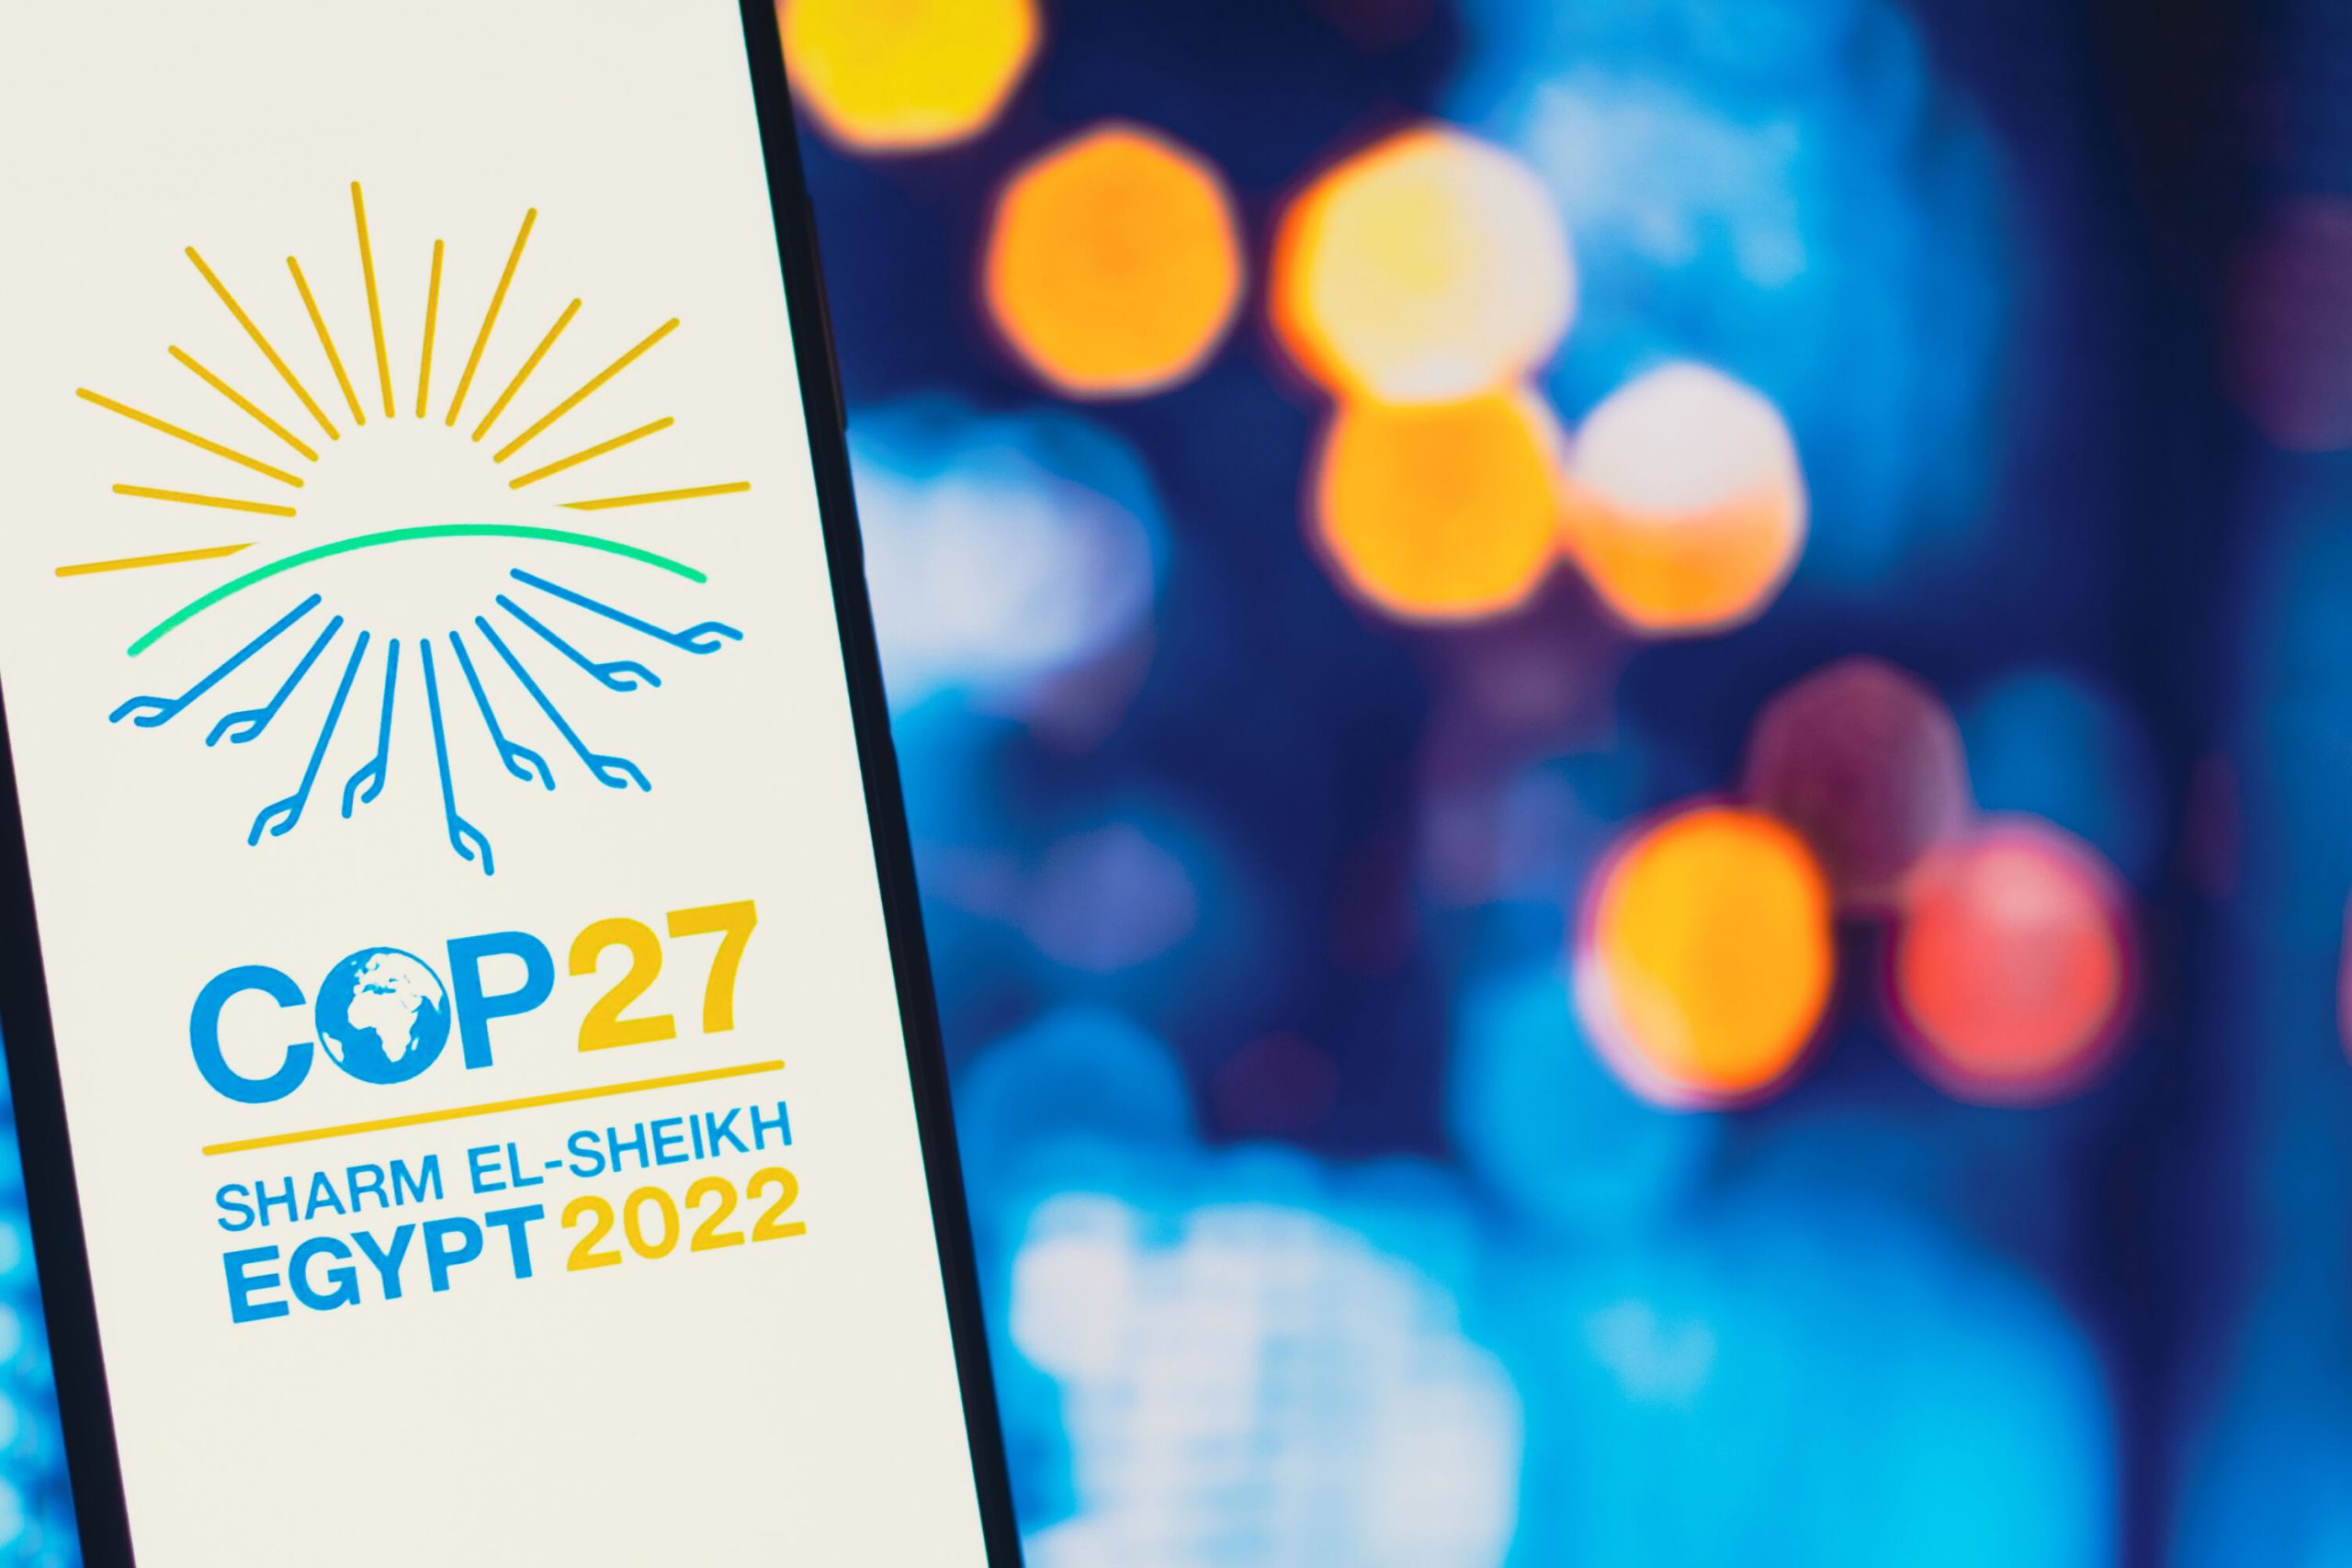 BRAZIL - 2022/06/14: In this photo illustration, the 2022 United Nations Climate Change Conference COP27 logo is seen on a smartphone screen The 2022 United Nations Climate Change Conference COP27 event will take place from the 7-18 November 2022, in Sharm El-Sheikh, Egypt. (Photo Illustration by Rafael Henrique/SOPA Images/LightRocket via Getty Images)